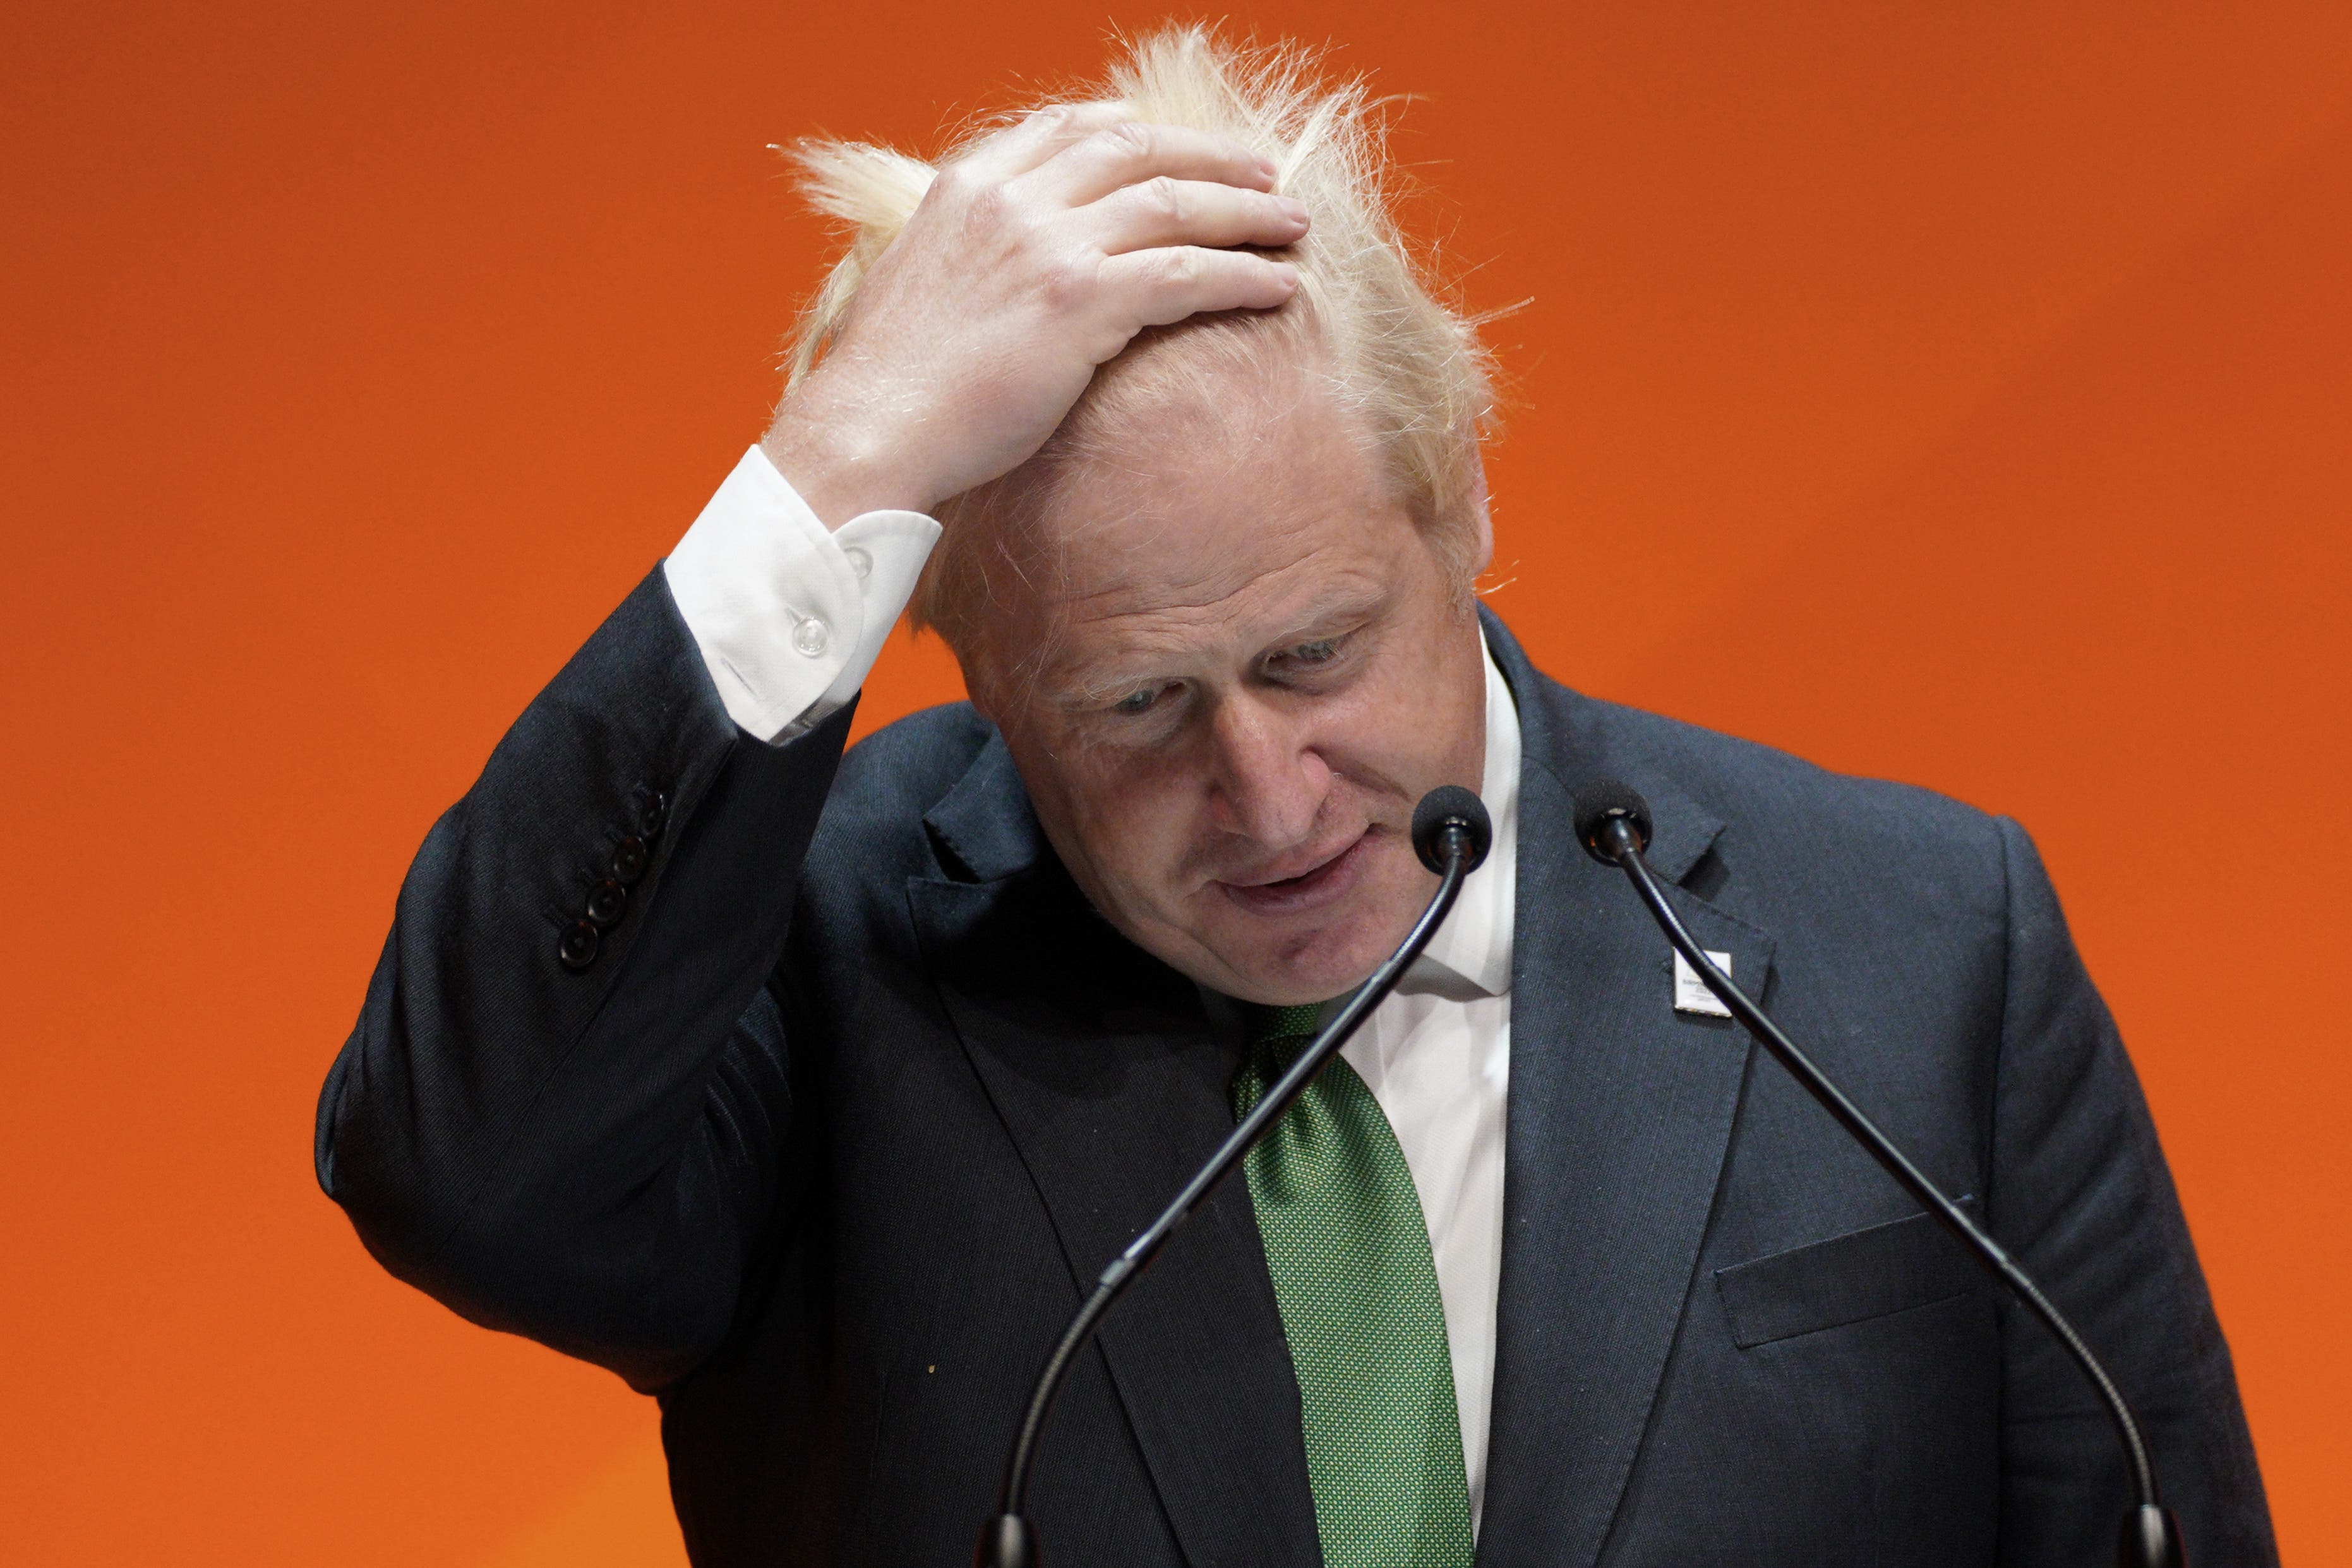 Boris’s cronyism and dishonesty tarnished the Tories, but the issues didn’t start there